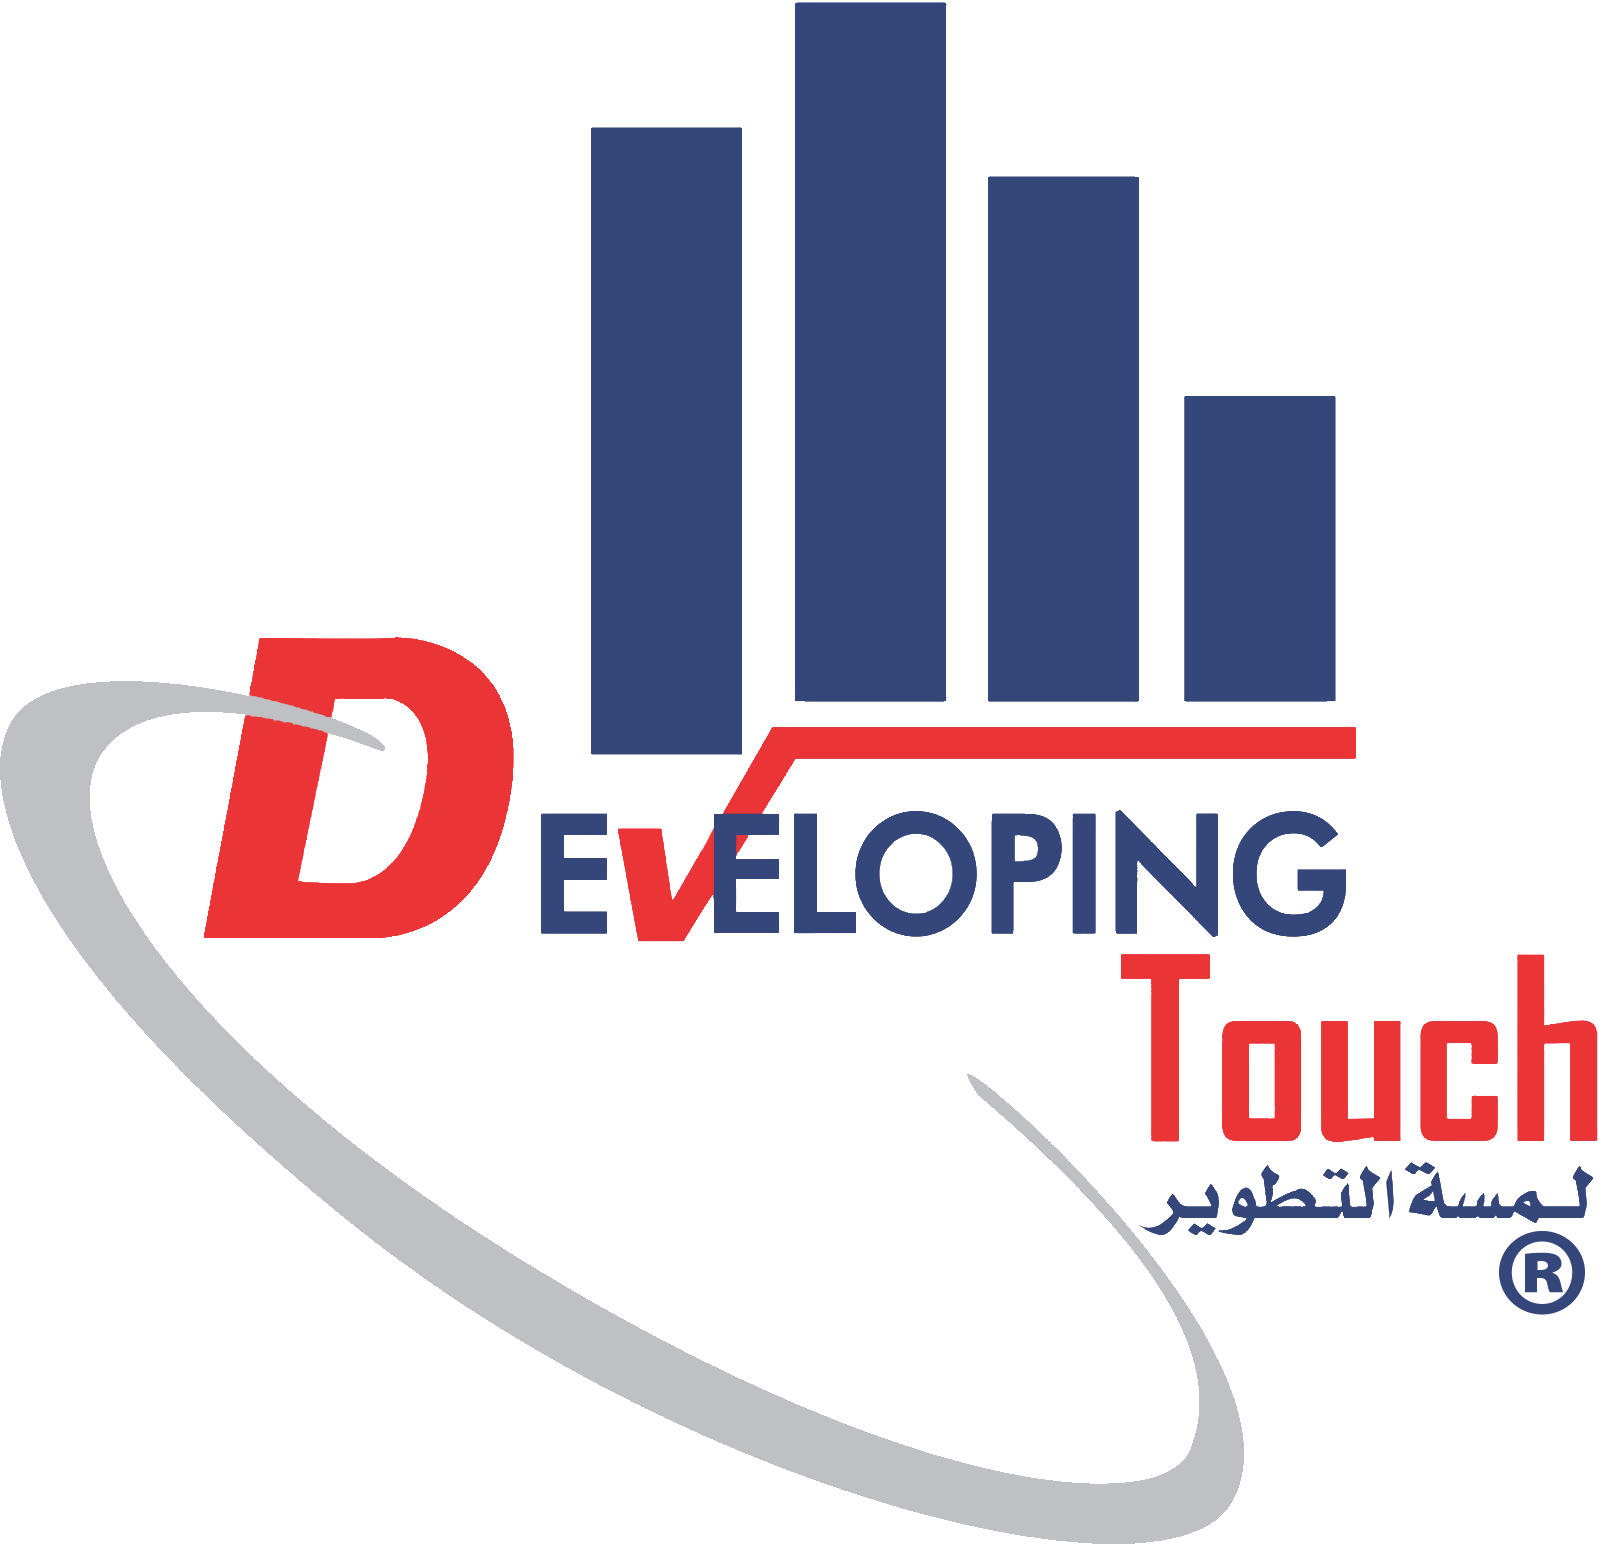 Developing Touch Contracting